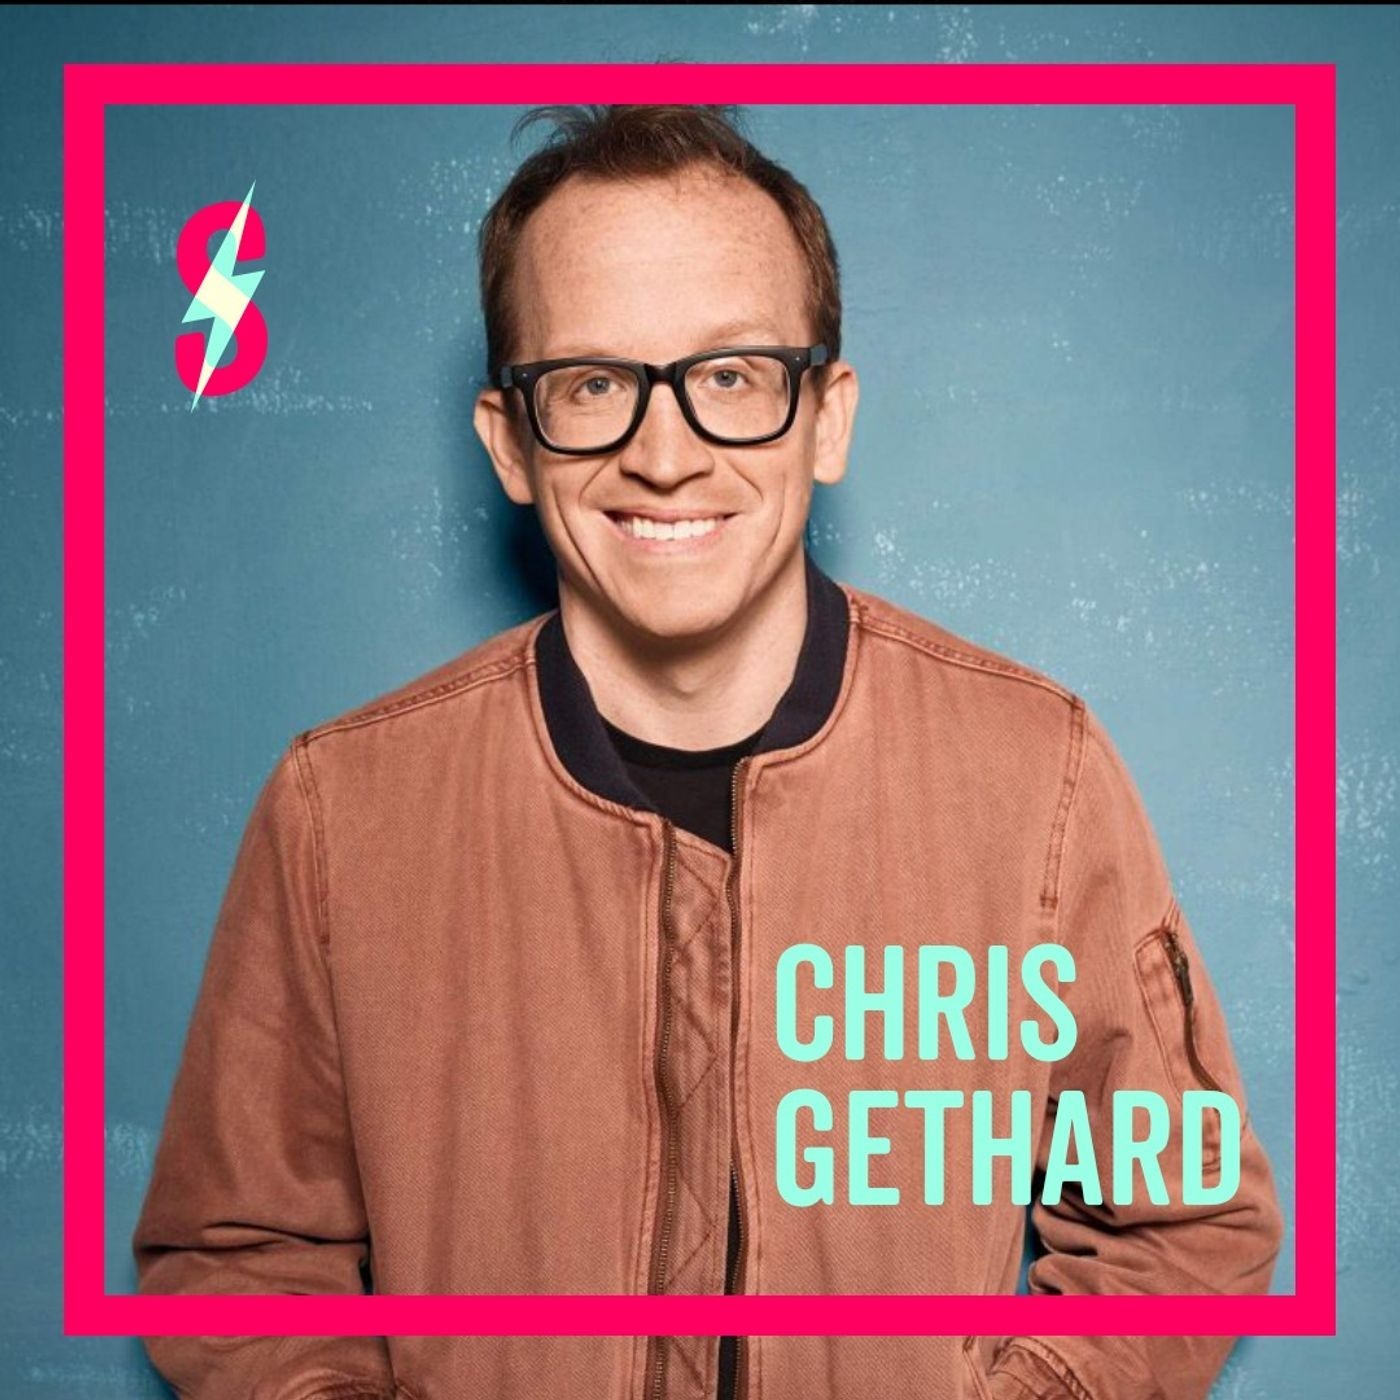 Chris Gethard Is Sparked By Grosse Pointe Blank: Finding The Humanity In Comedy